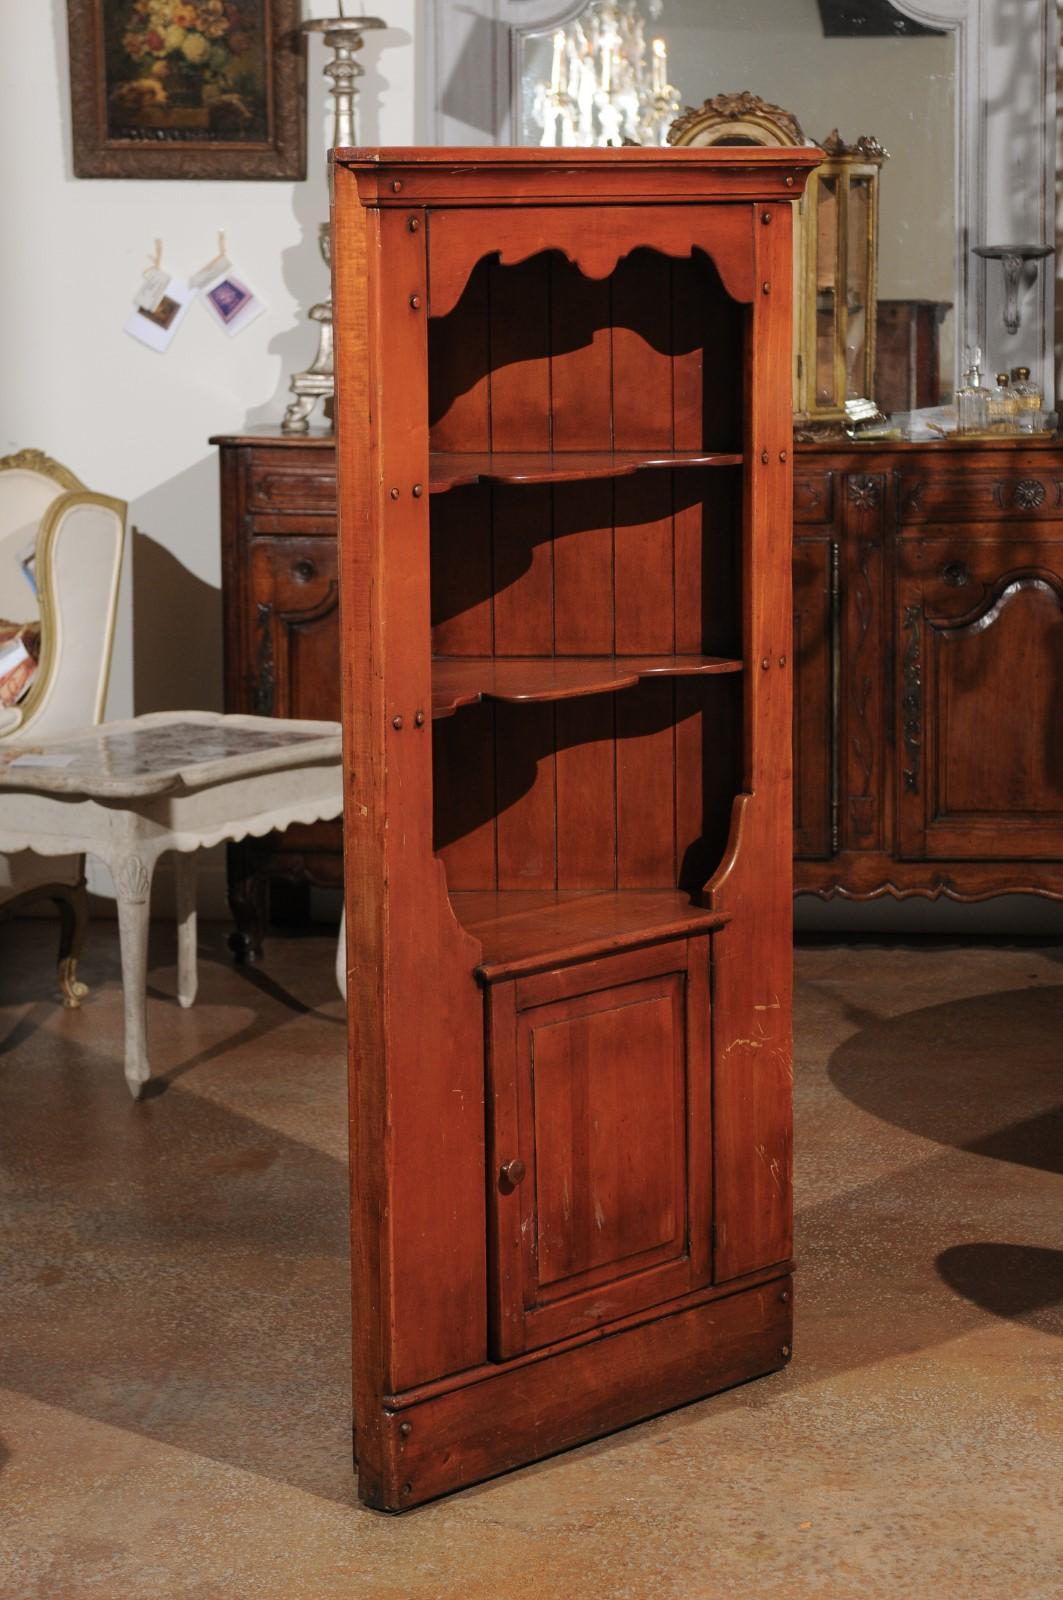 Early 20th Century American Cherry Corner Cabinet with Shelves and Single Door 4